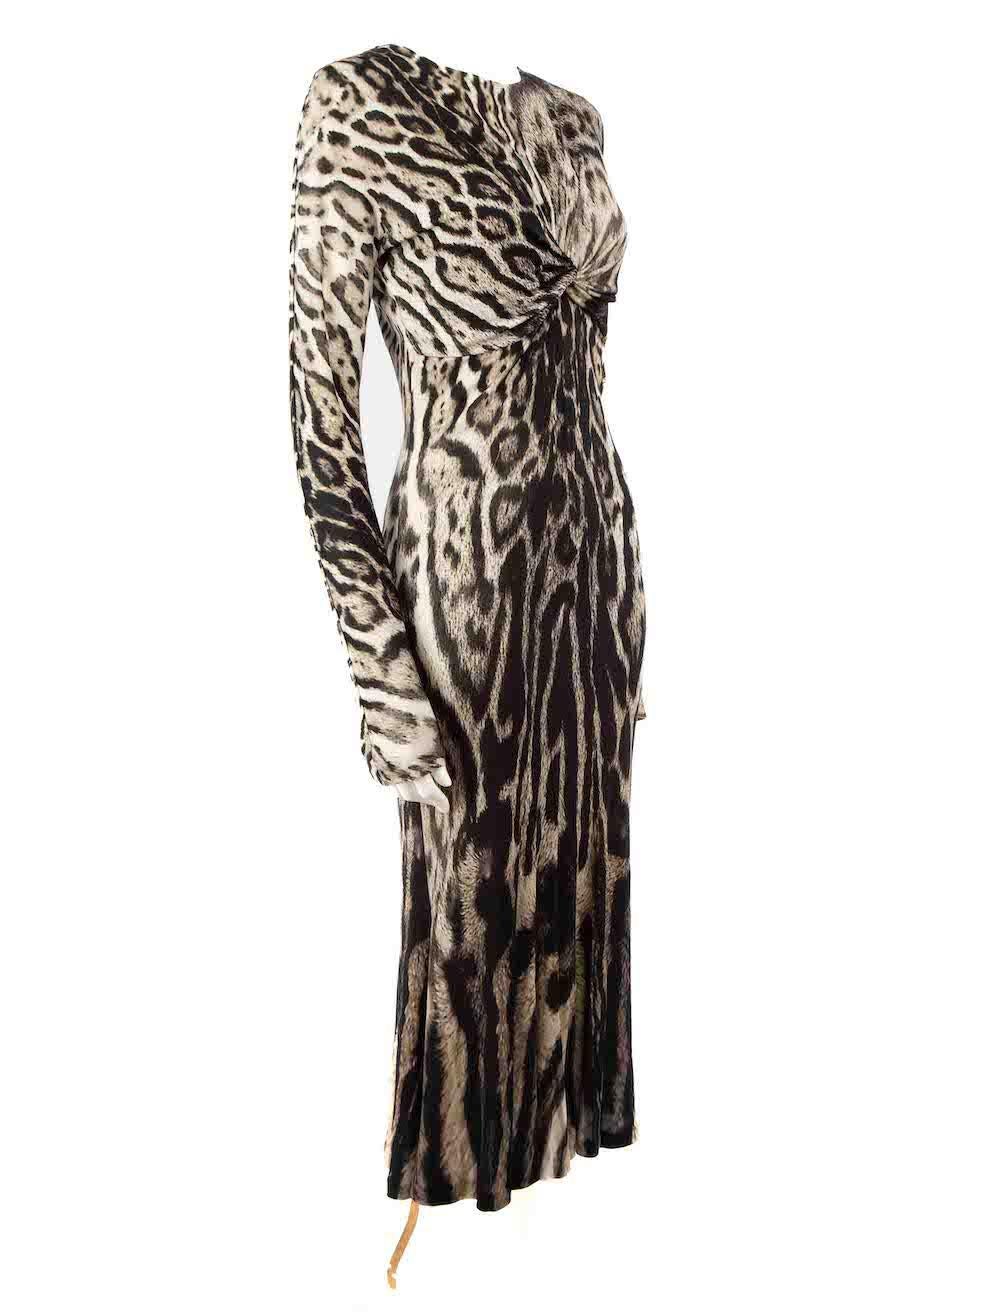 CONDITION is Very good. Minimal wear to dress is evident. Minimal pull thread to back hemline on this used Roberto Cavalli designer resale item.
 
 Details
 Grey
 Viscose
 Midi dress
 Bodycon and stretchy
 Leopard print pattern
 Round neckline
